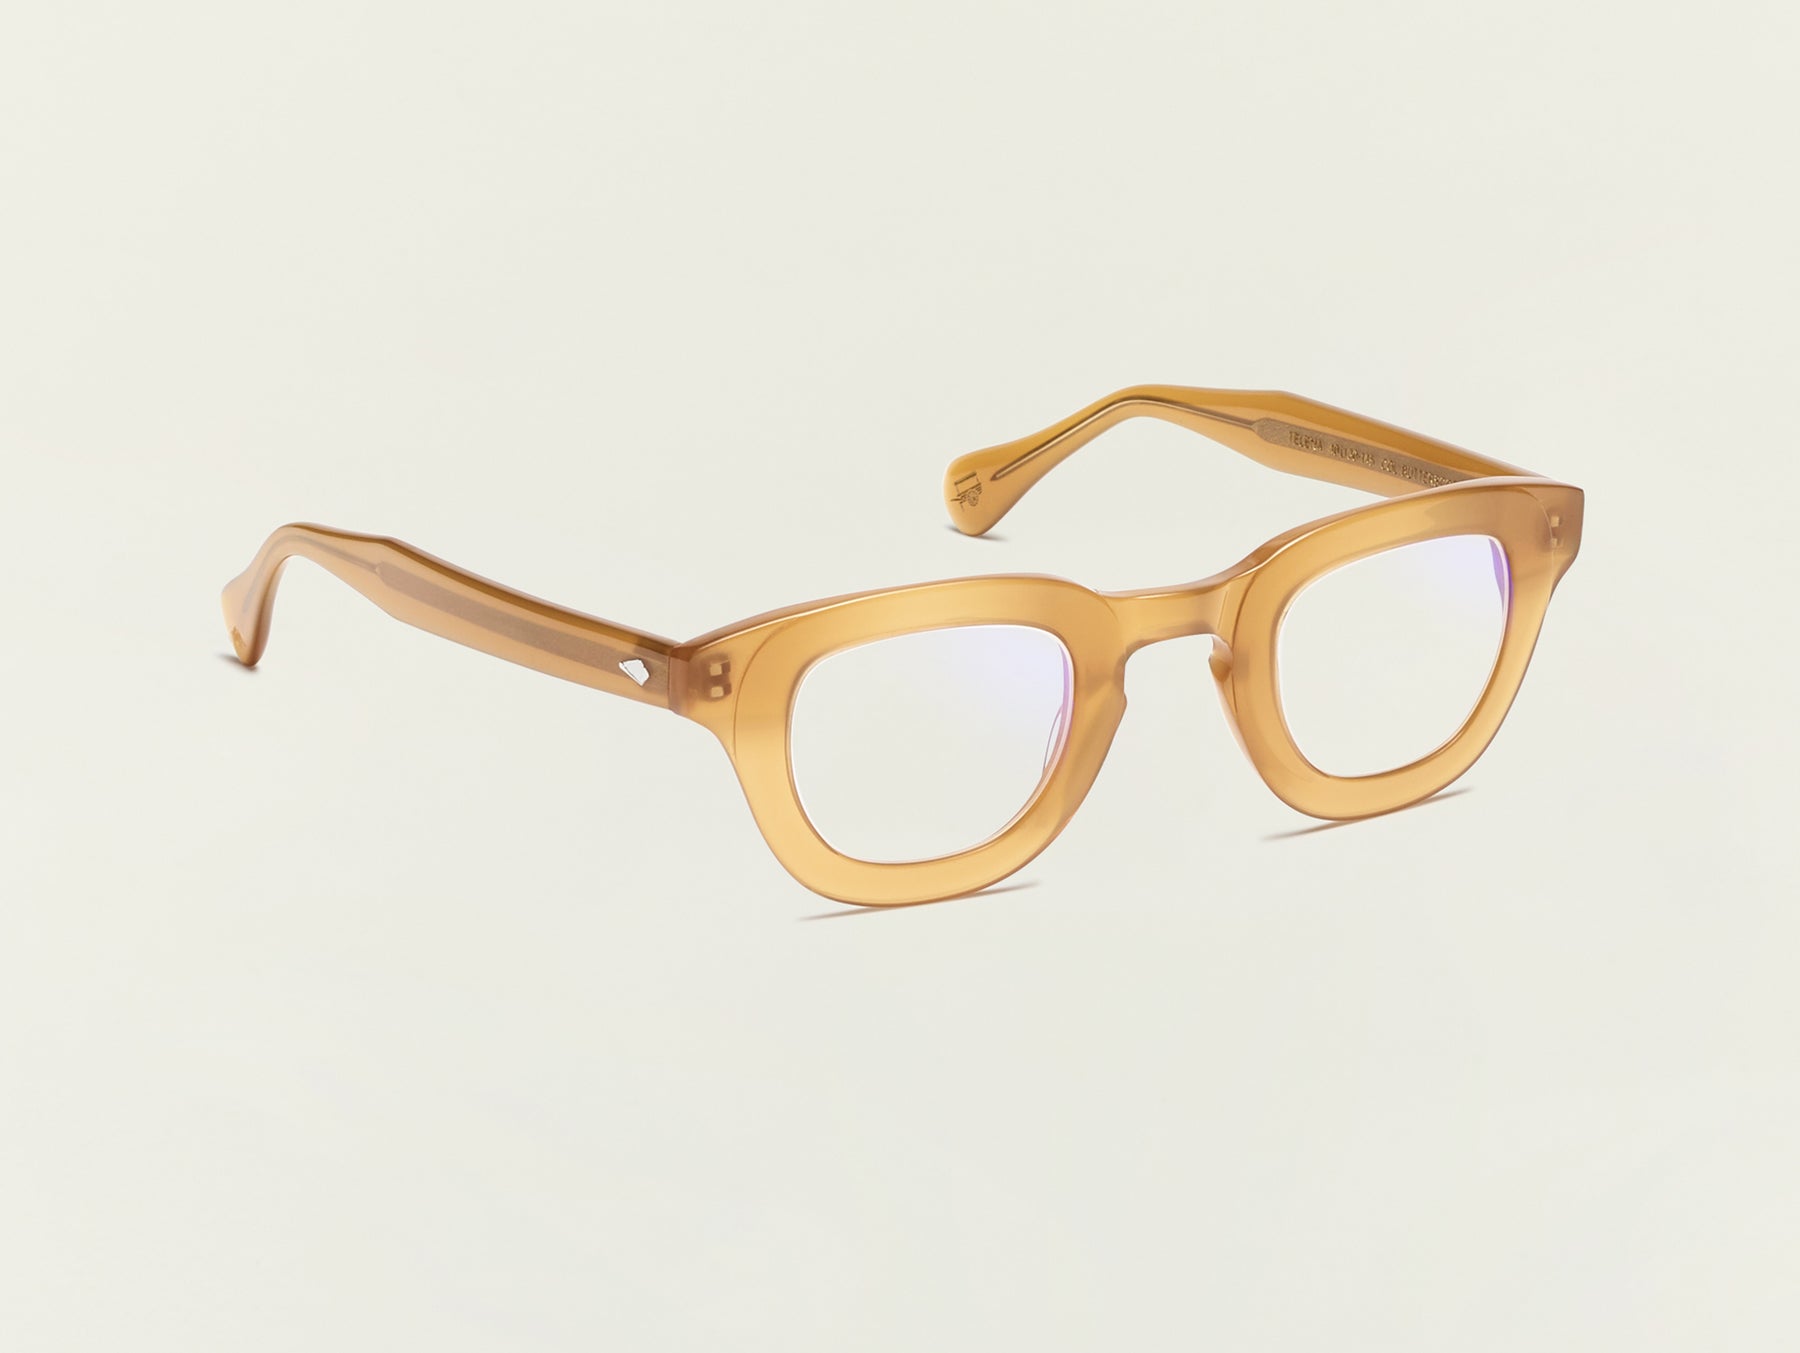 The TELENA in Butterscotch with Blue Protect Lenses